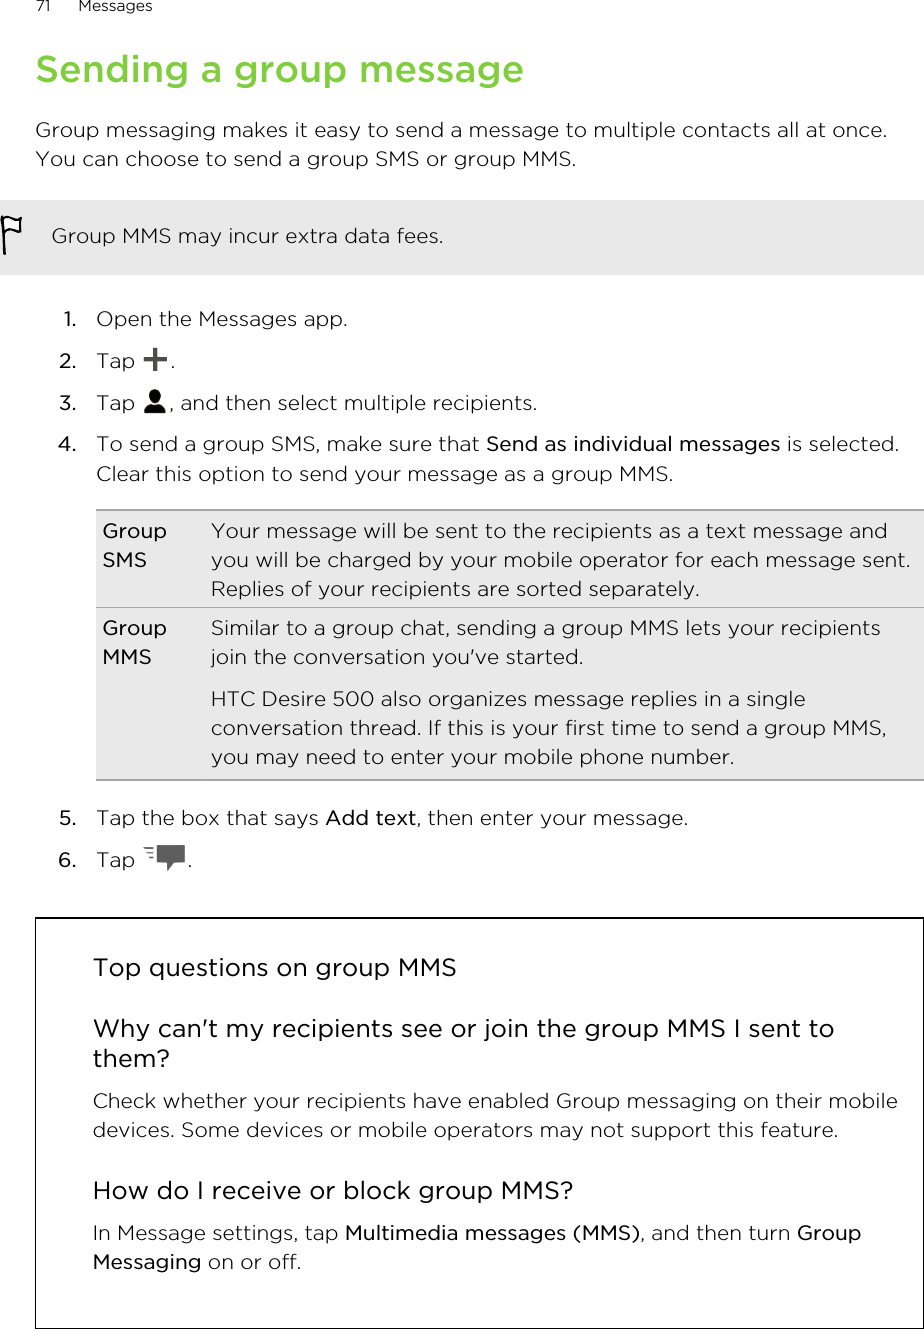 Sending a group messageGroup messaging makes it easy to send a message to multiple contacts all at once.You can choose to send a group SMS or group MMS.Group MMS may incur extra data fees.1. Open the Messages app.2. Tap  .3. Tap  , and then select multiple recipients.4. To send a group SMS, make sure that Send as individual messages is selected.Clear this option to send your message as a group MMS.GroupSMSYour message will be sent to the recipients as a text message andyou will be charged by your mobile operator for each message sent.Replies of your recipients are sorted separately.GroupMMSSimilar to a group chat, sending a group MMS lets your recipientsjoin the conversation you&apos;ve started.HTC Desire 500 also organizes message replies in a singleconversation thread. If this is your first time to send a group MMS,you may need to enter your mobile phone number.5. Tap the box that says Add text, then enter your message.6. Tap  .Top questions on group MMSWhy can&apos;t my recipients see or join the group MMS I sent tothem?Check whether your recipients have enabled Group messaging on their mobiledevices. Some devices or mobile operators may not support this feature.How do I receive or block group MMS?In Message settings, tap Multimedia messages (MMS), and then turn GroupMessaging on or off.71 Messages